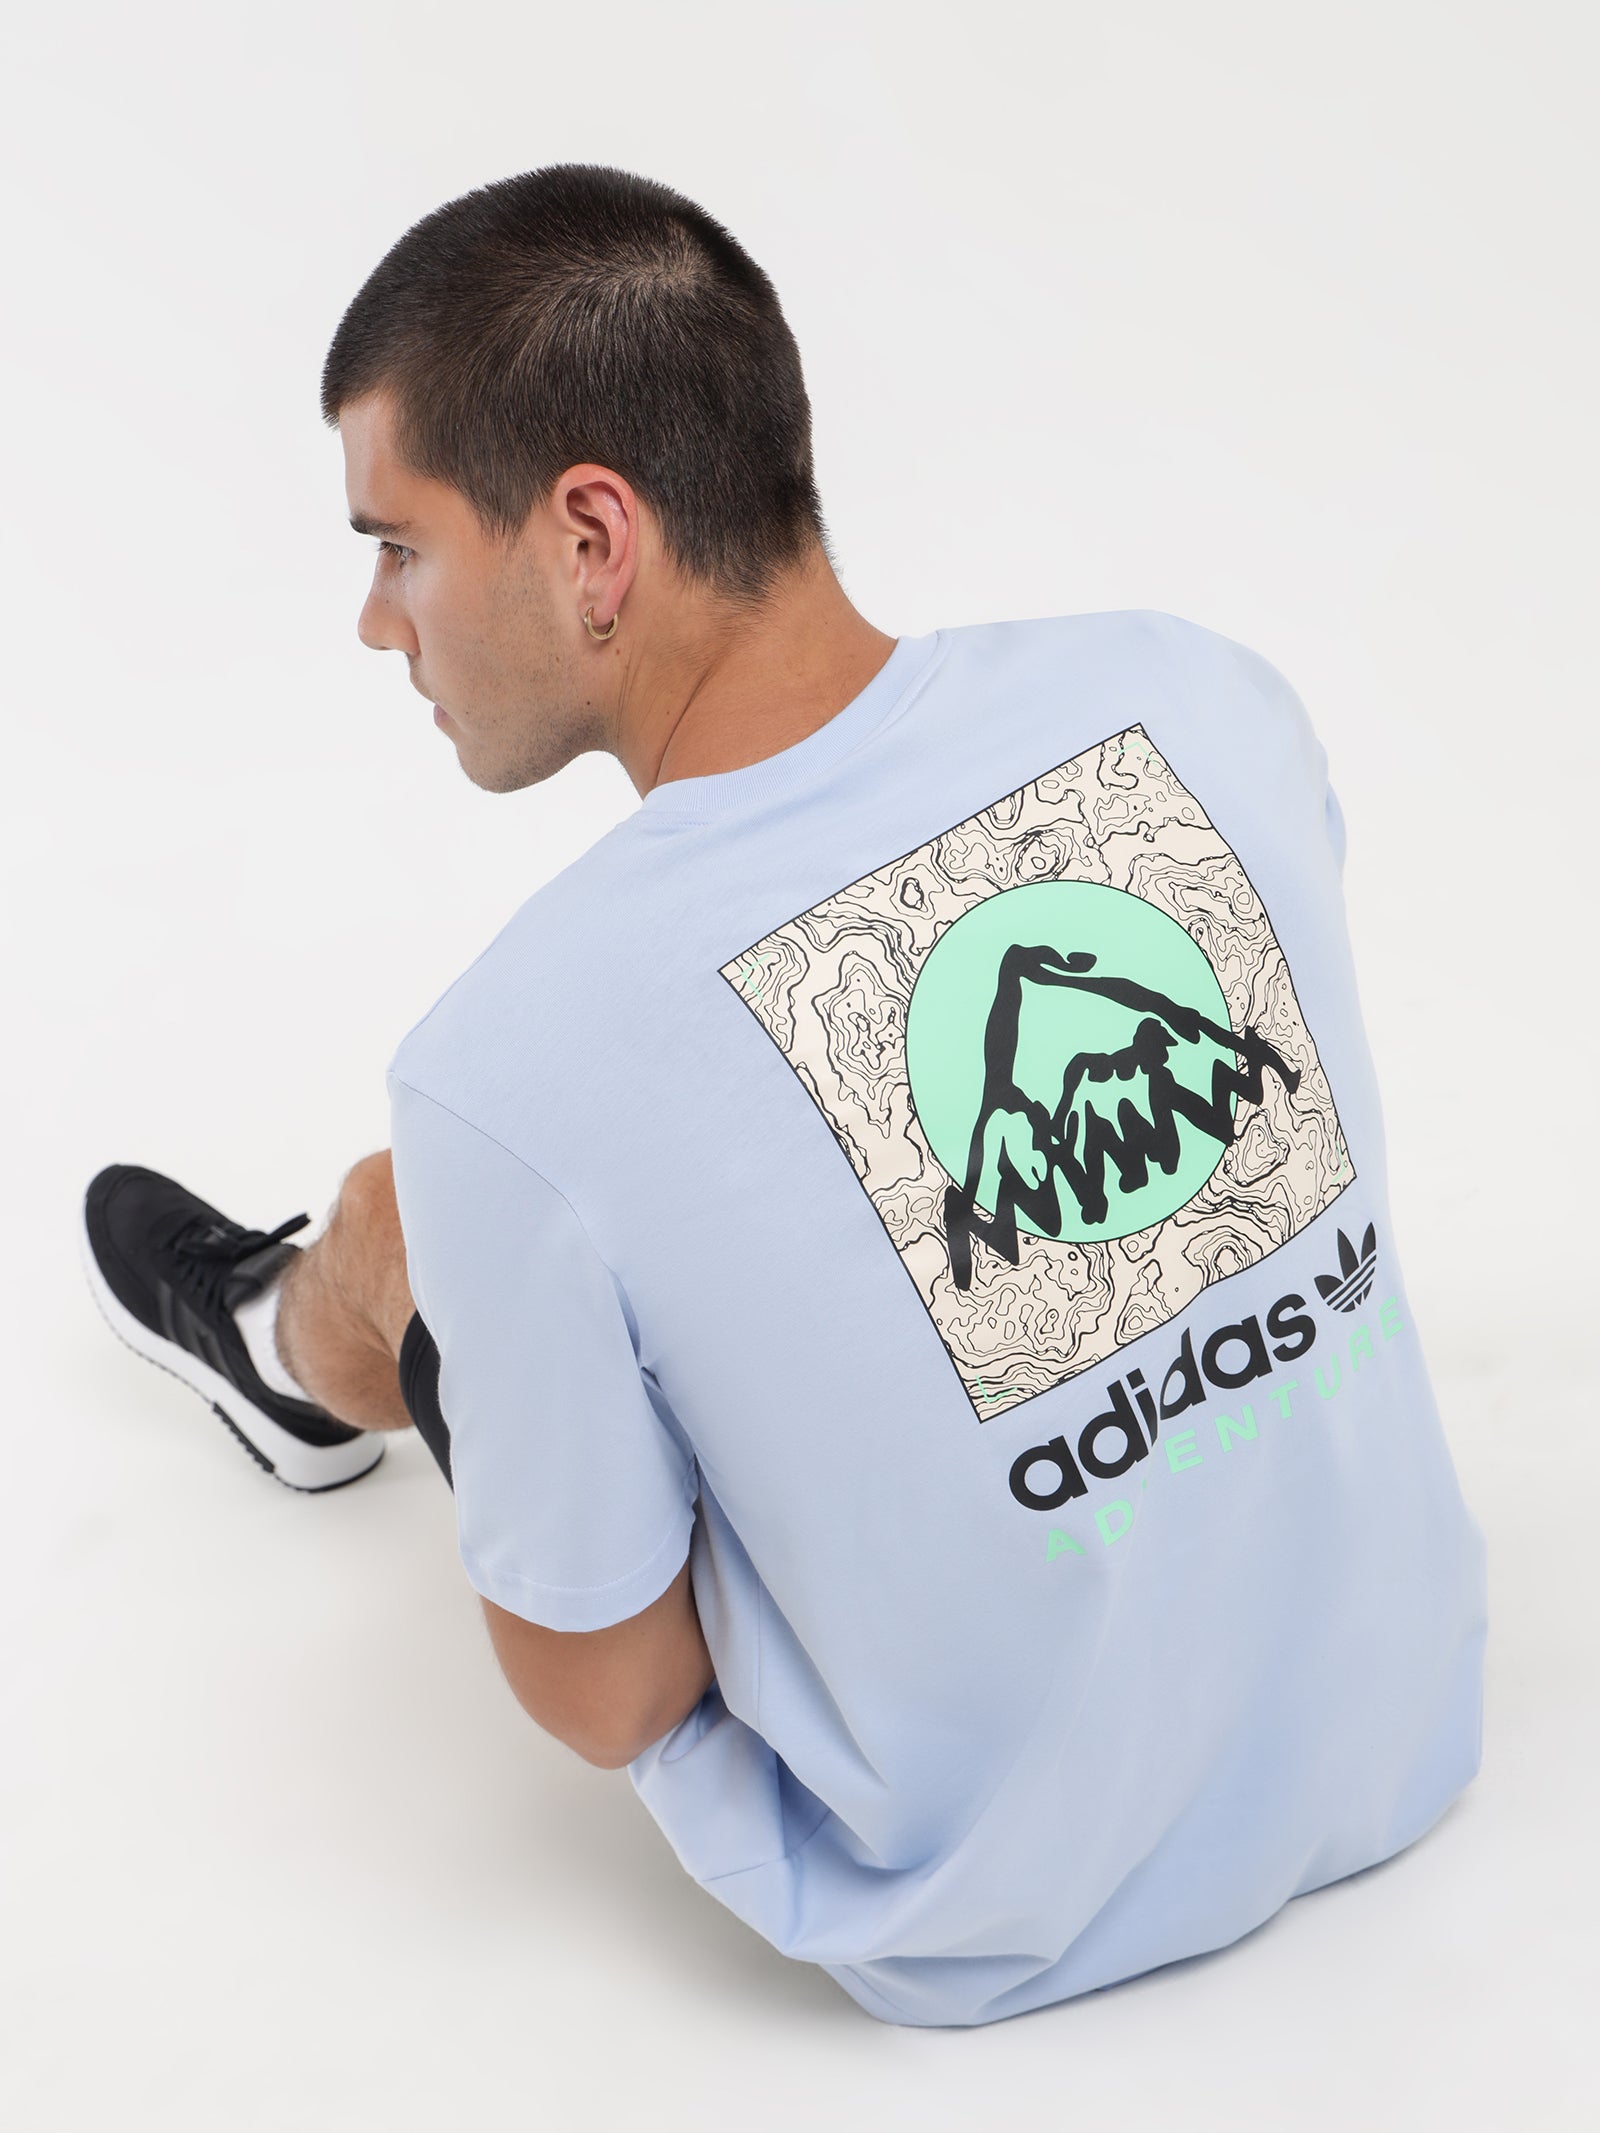 Adidas Originals Clothing, Accessories & Shoes Online | Fast Delivery 2 - Glue